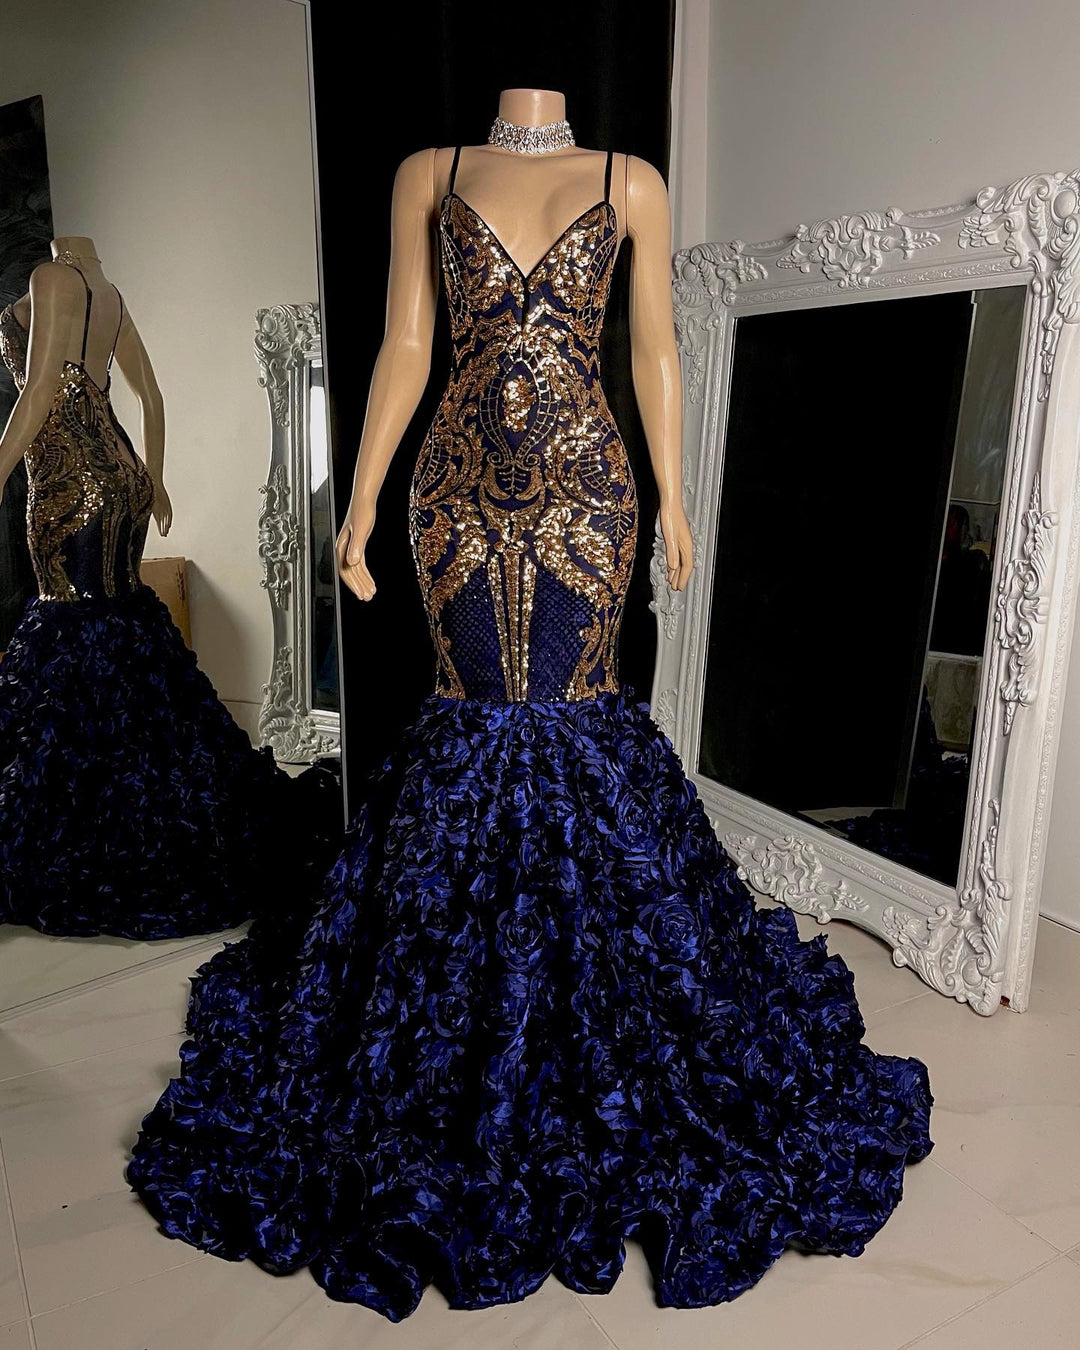 The Fallon Gown